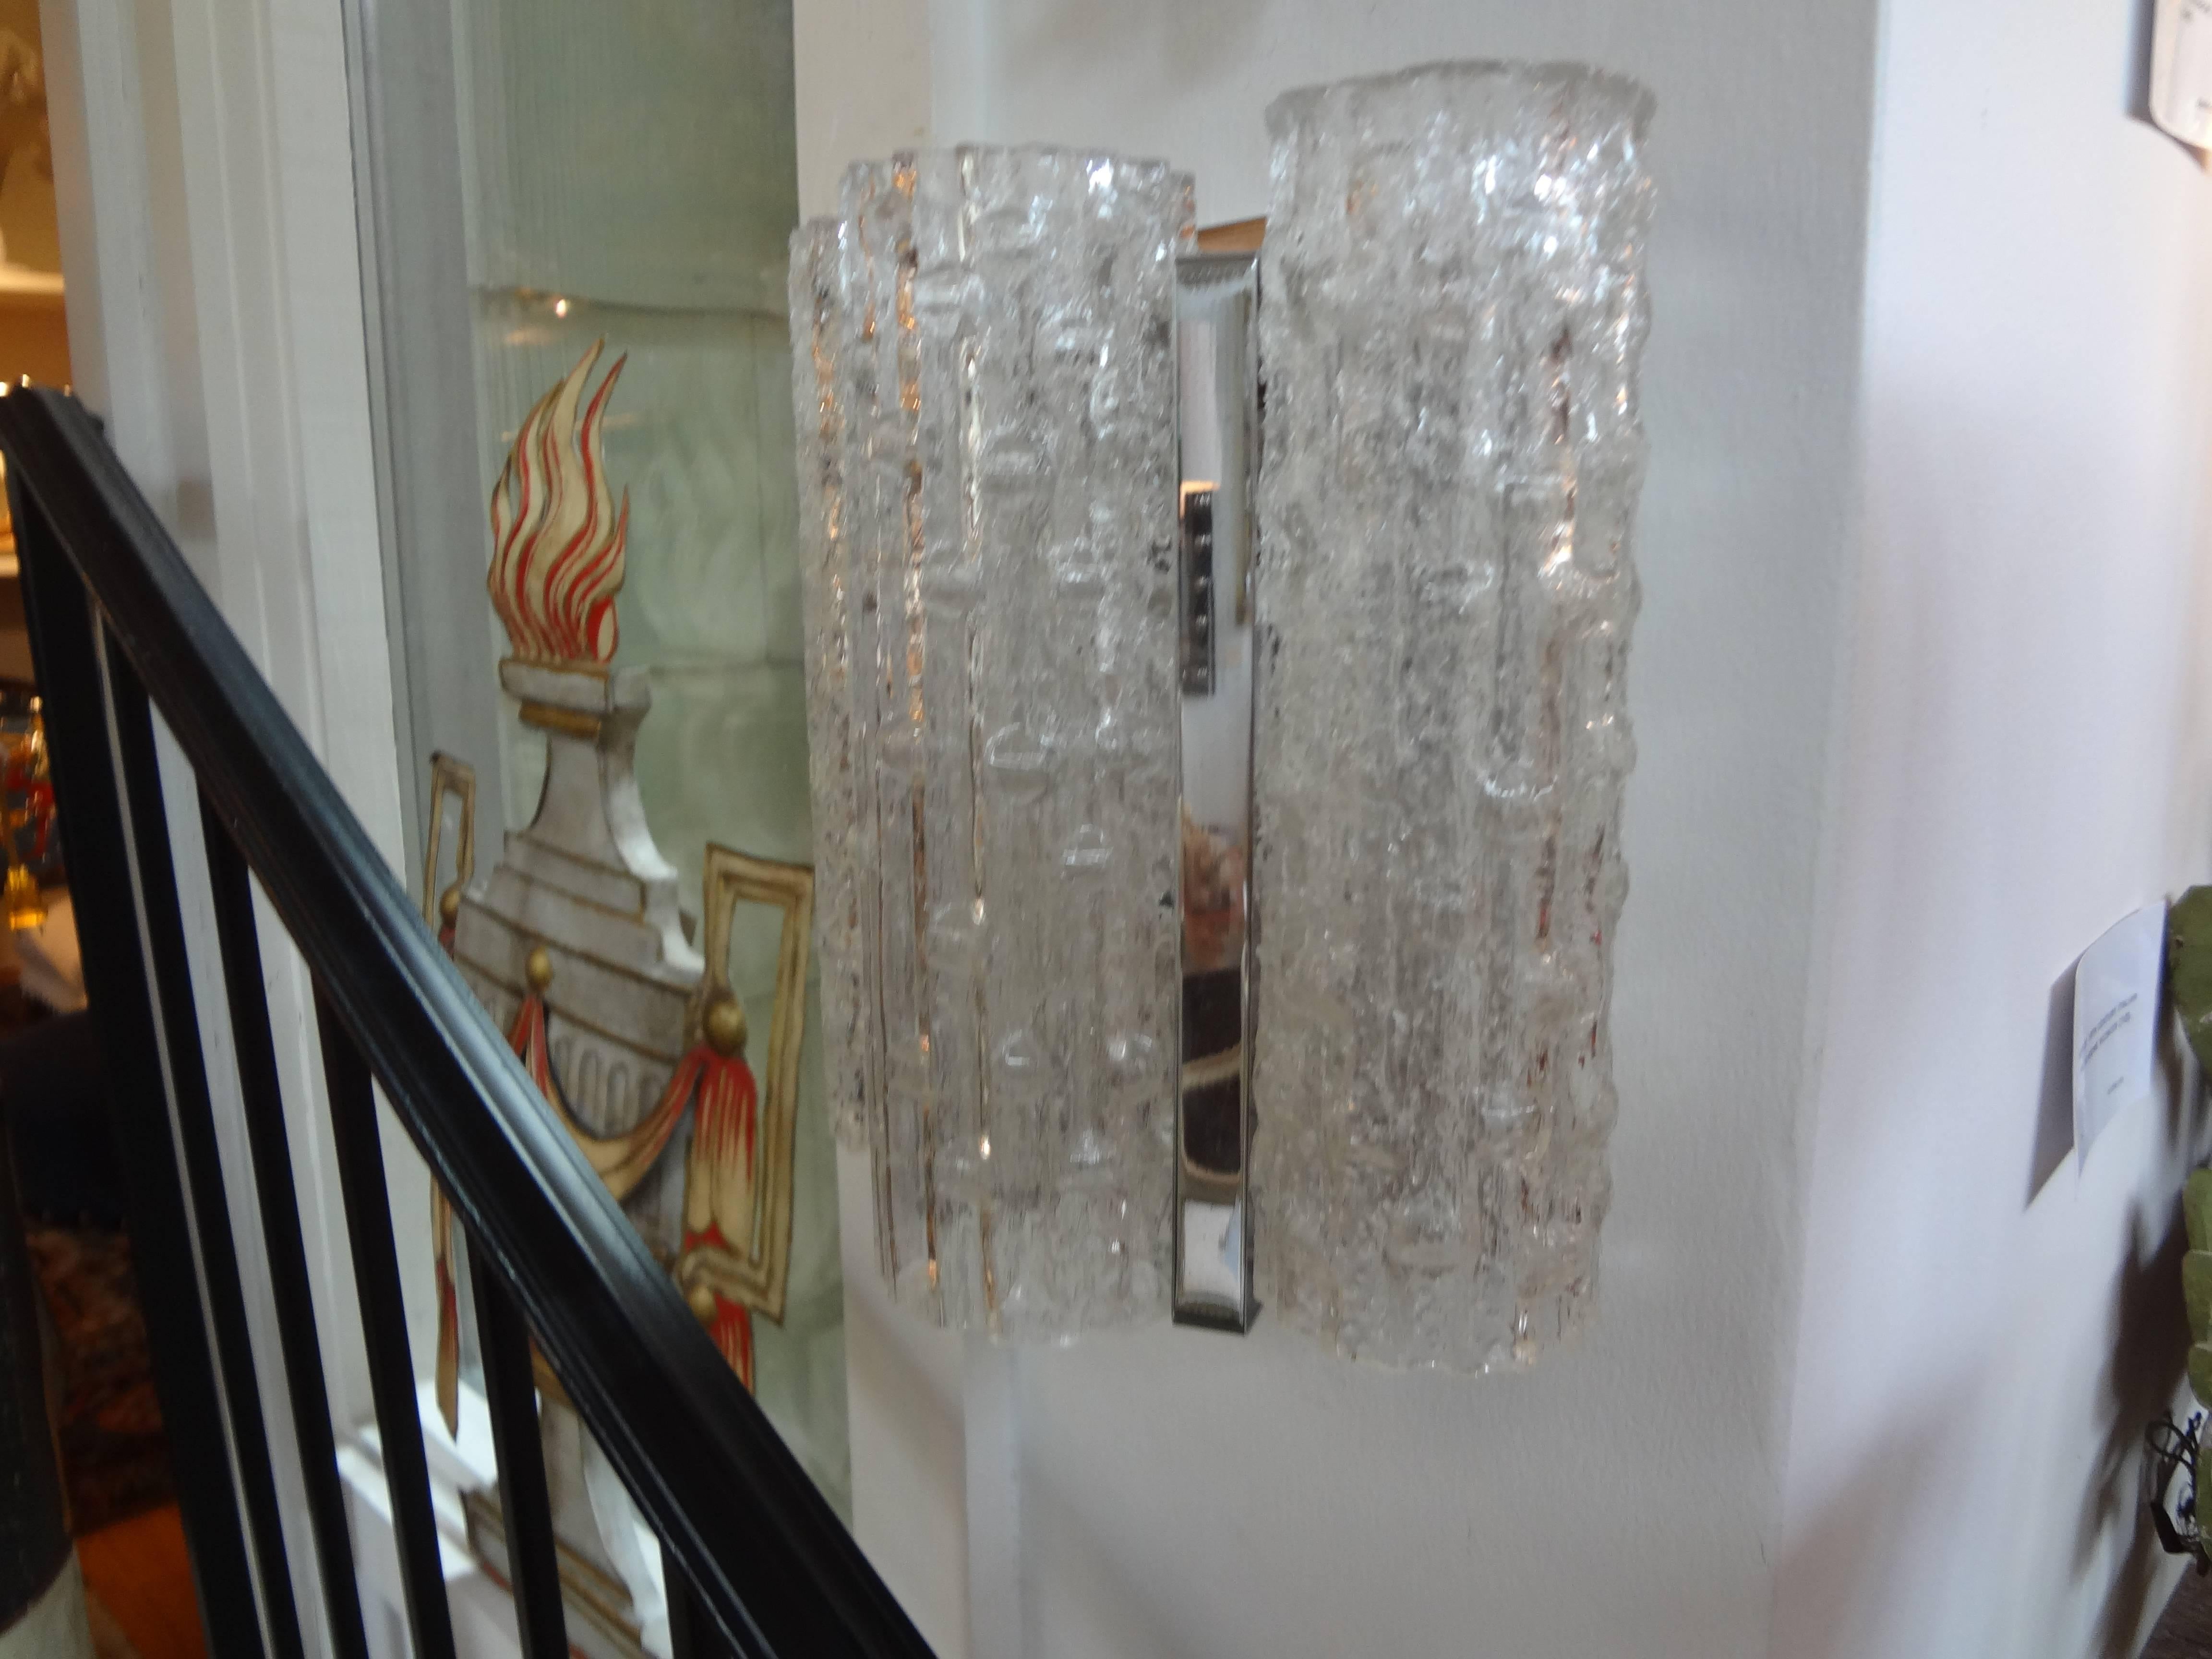 Pair of Venini style Murano glass sconces.
Pair of Italian Mid-Century Modern Venini style Murano glass sconces with chrome bases. These Murano sconces or Venetian glass sconces have been newly wired for the U.S. market.